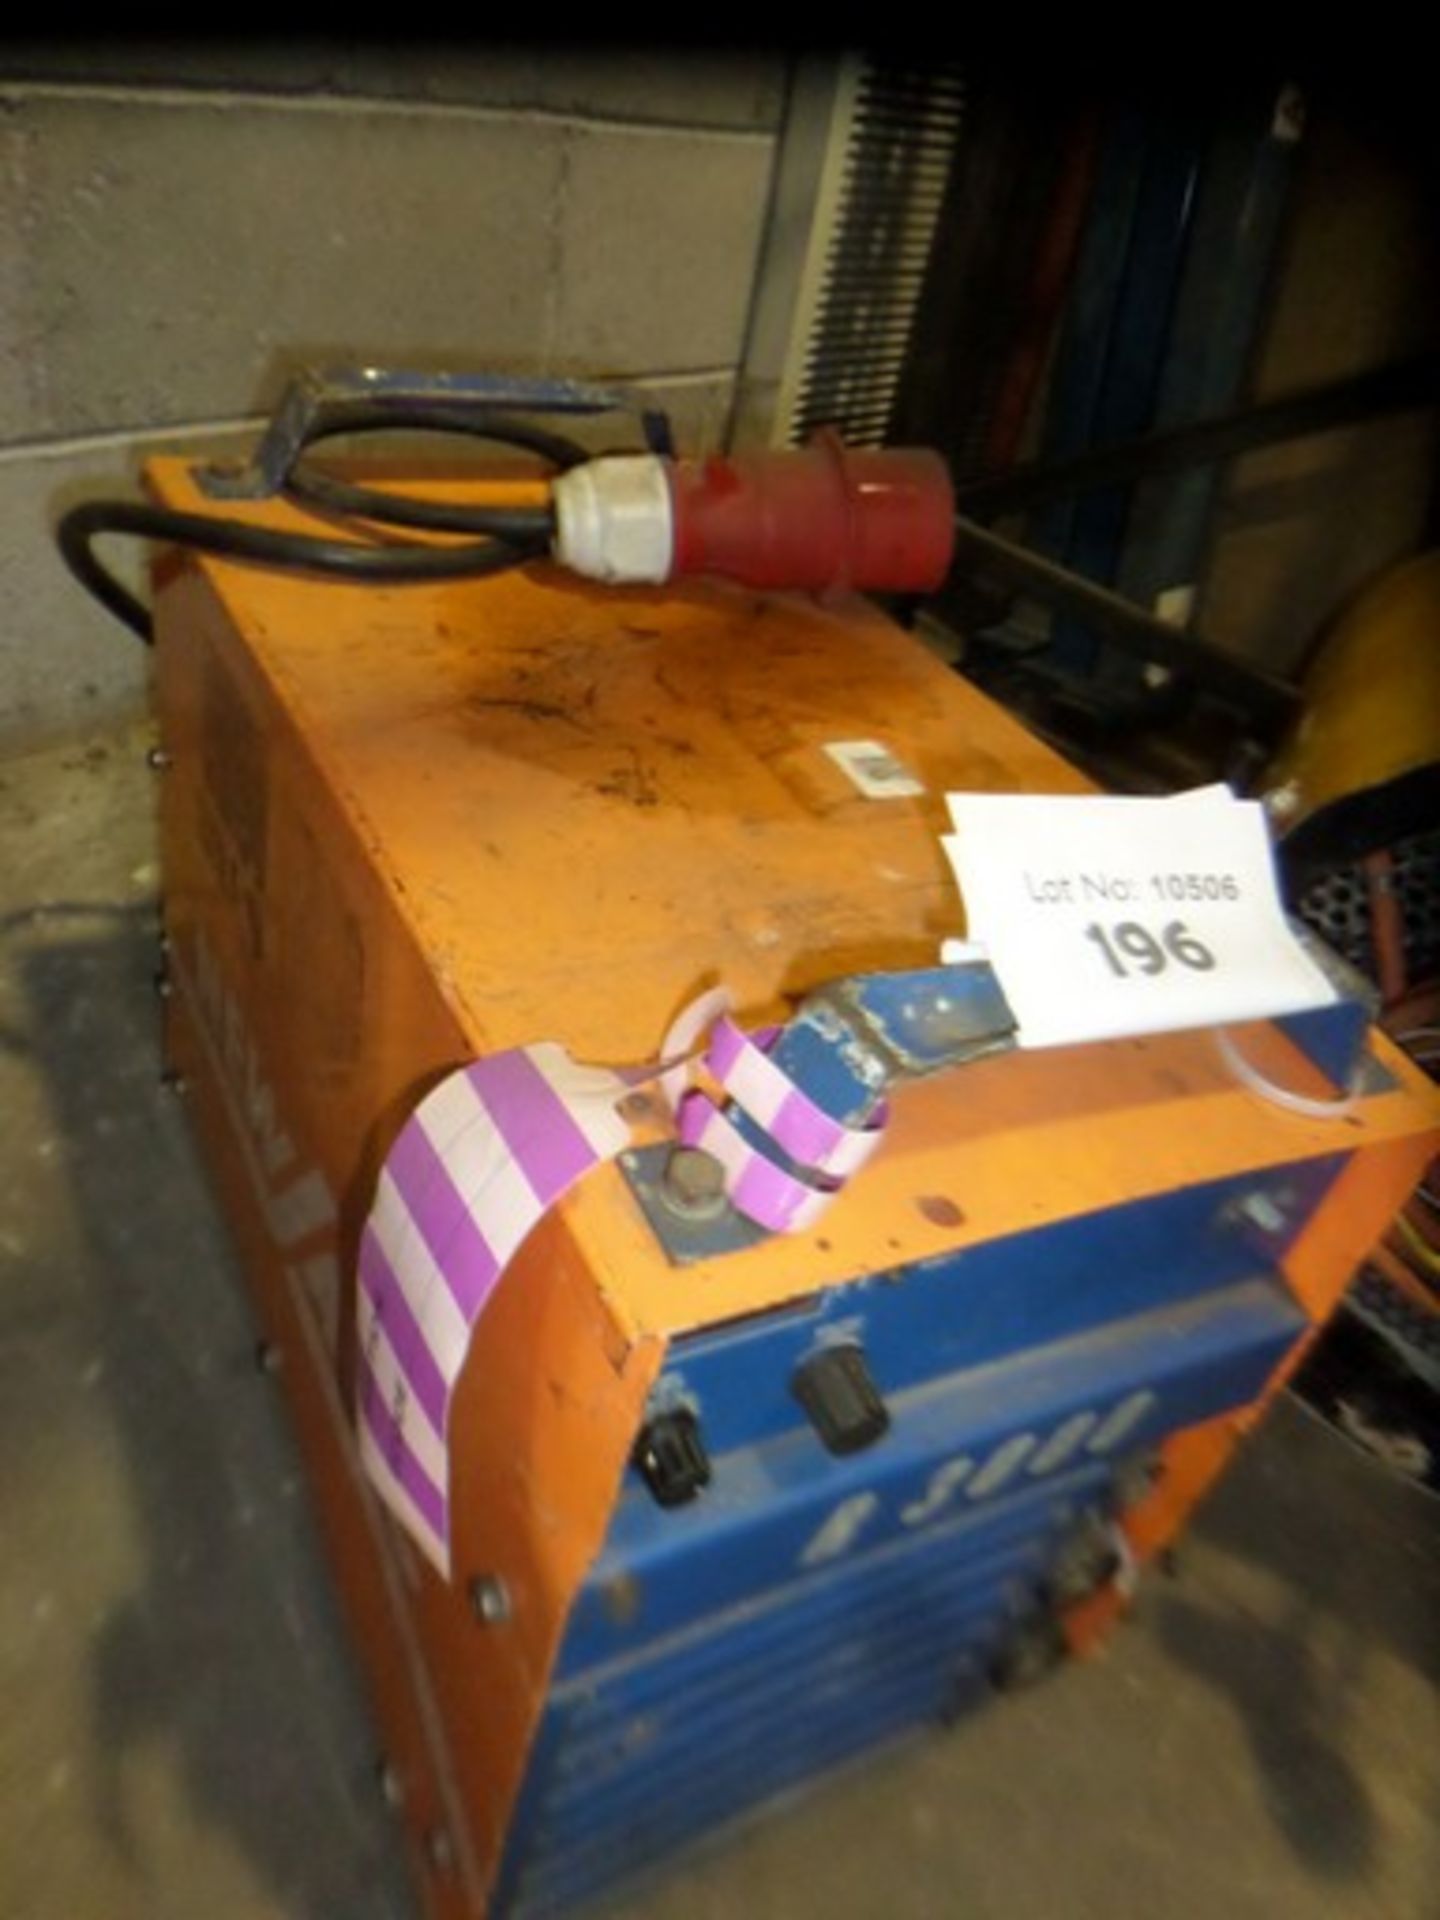 Newarc R 3000 {009647} 300AMP INVERTER 3 phase 5 pin connection and has been tested and is in good - Image 2 of 2